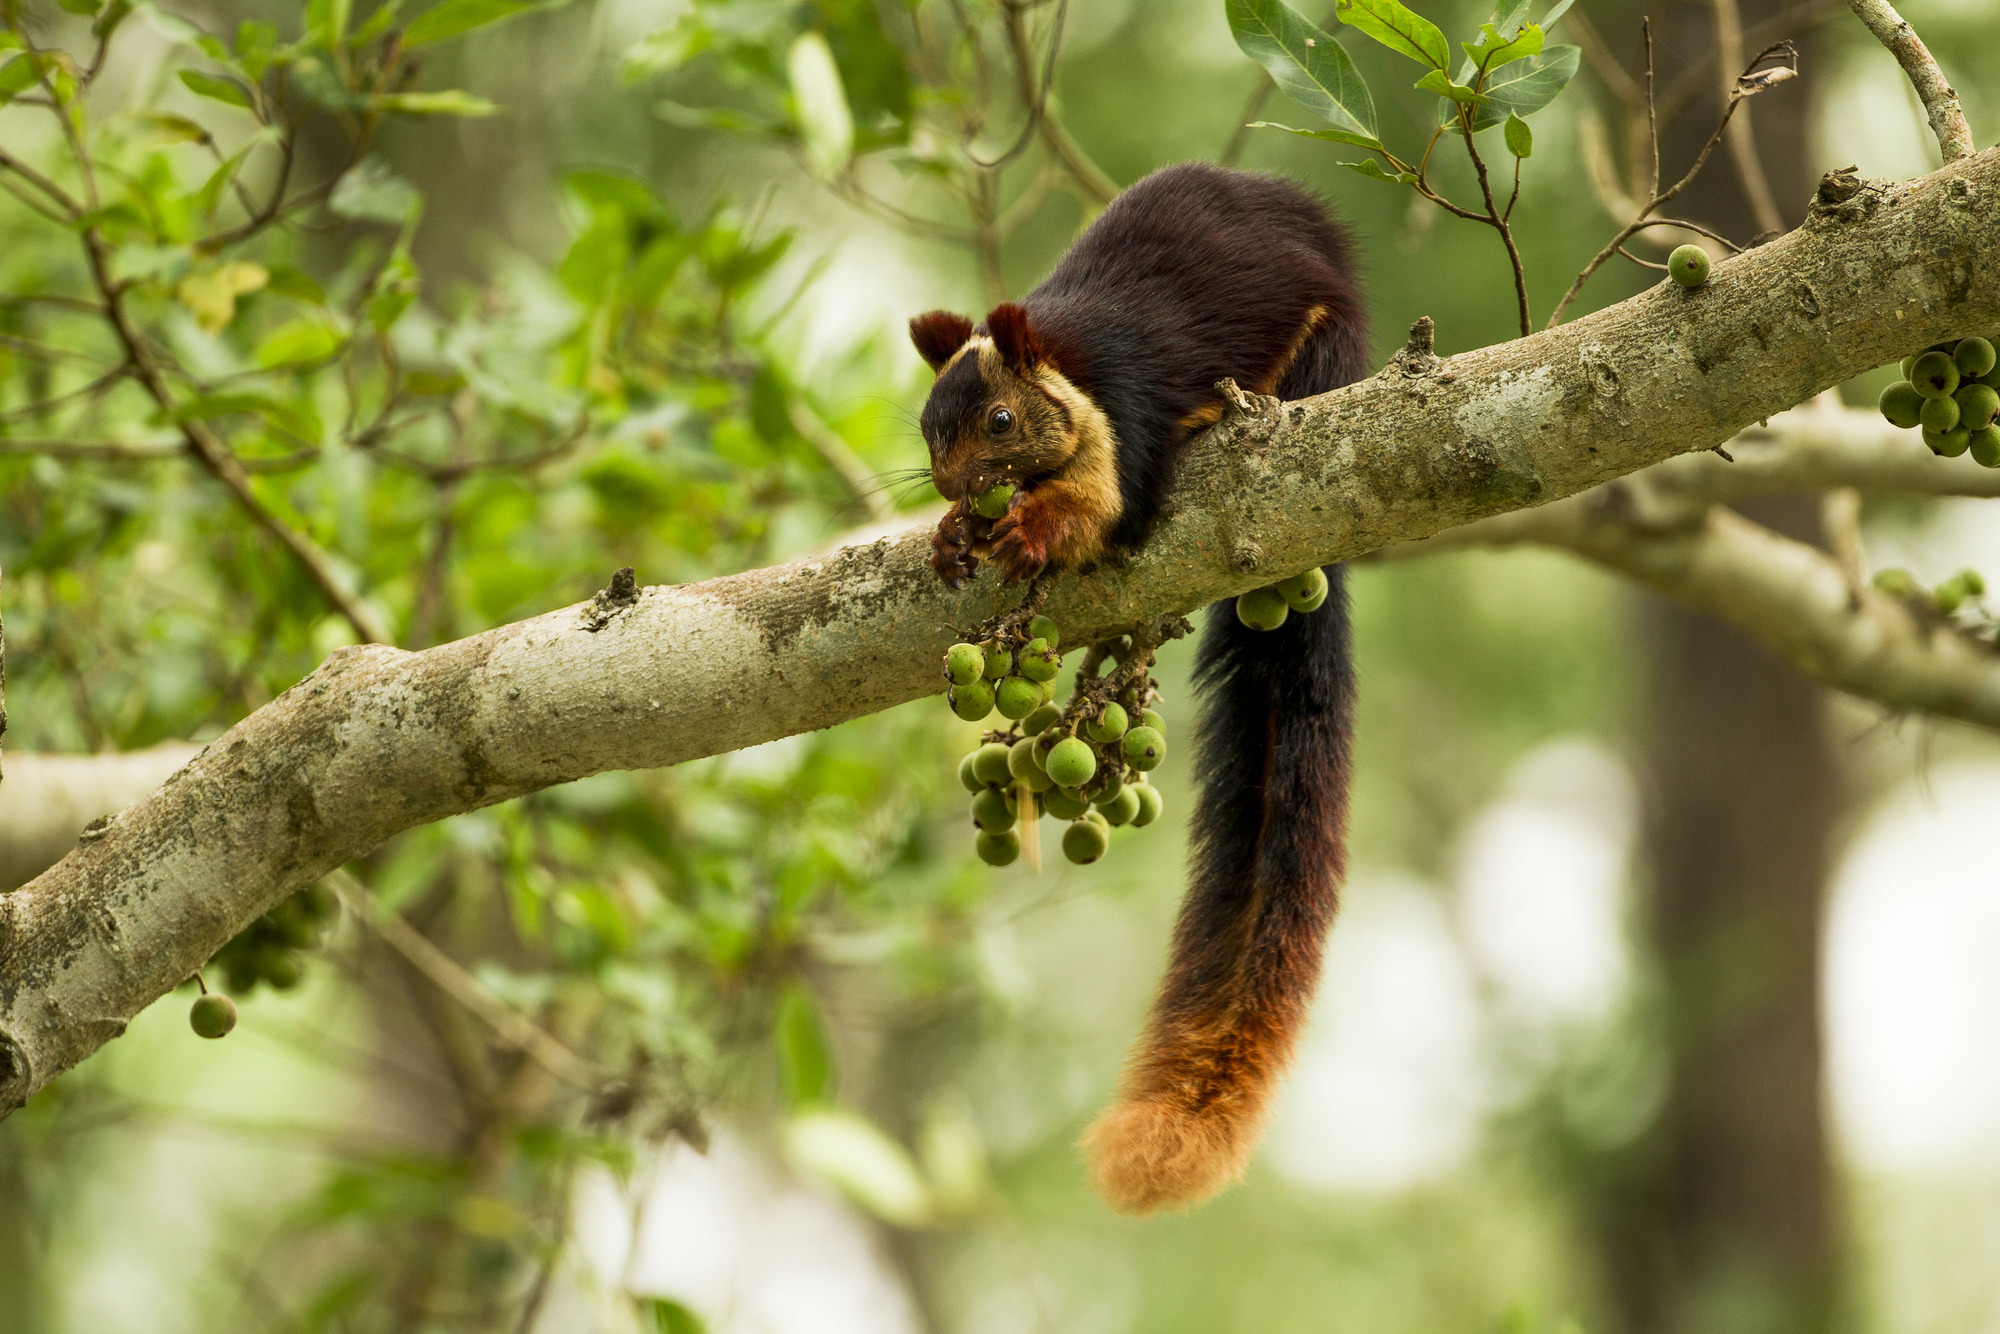 The Malabar giant squirrel lives in the forests of India © Sadesh Kadur/Felis Images